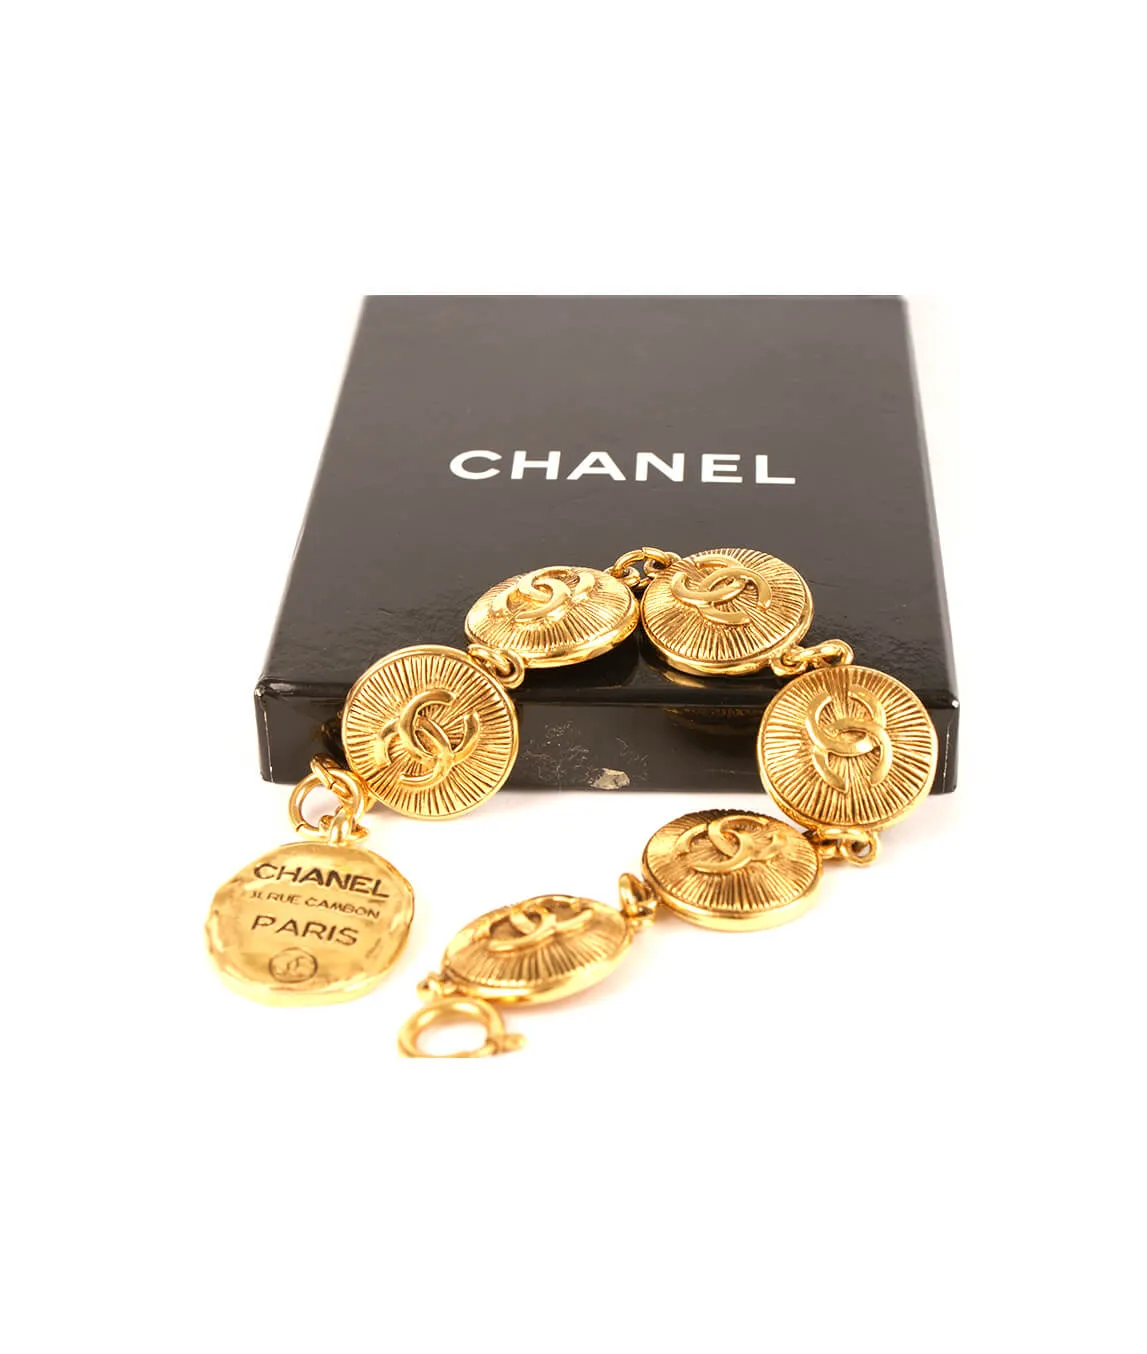 31 Rue Cambon Chanel bracelet with box